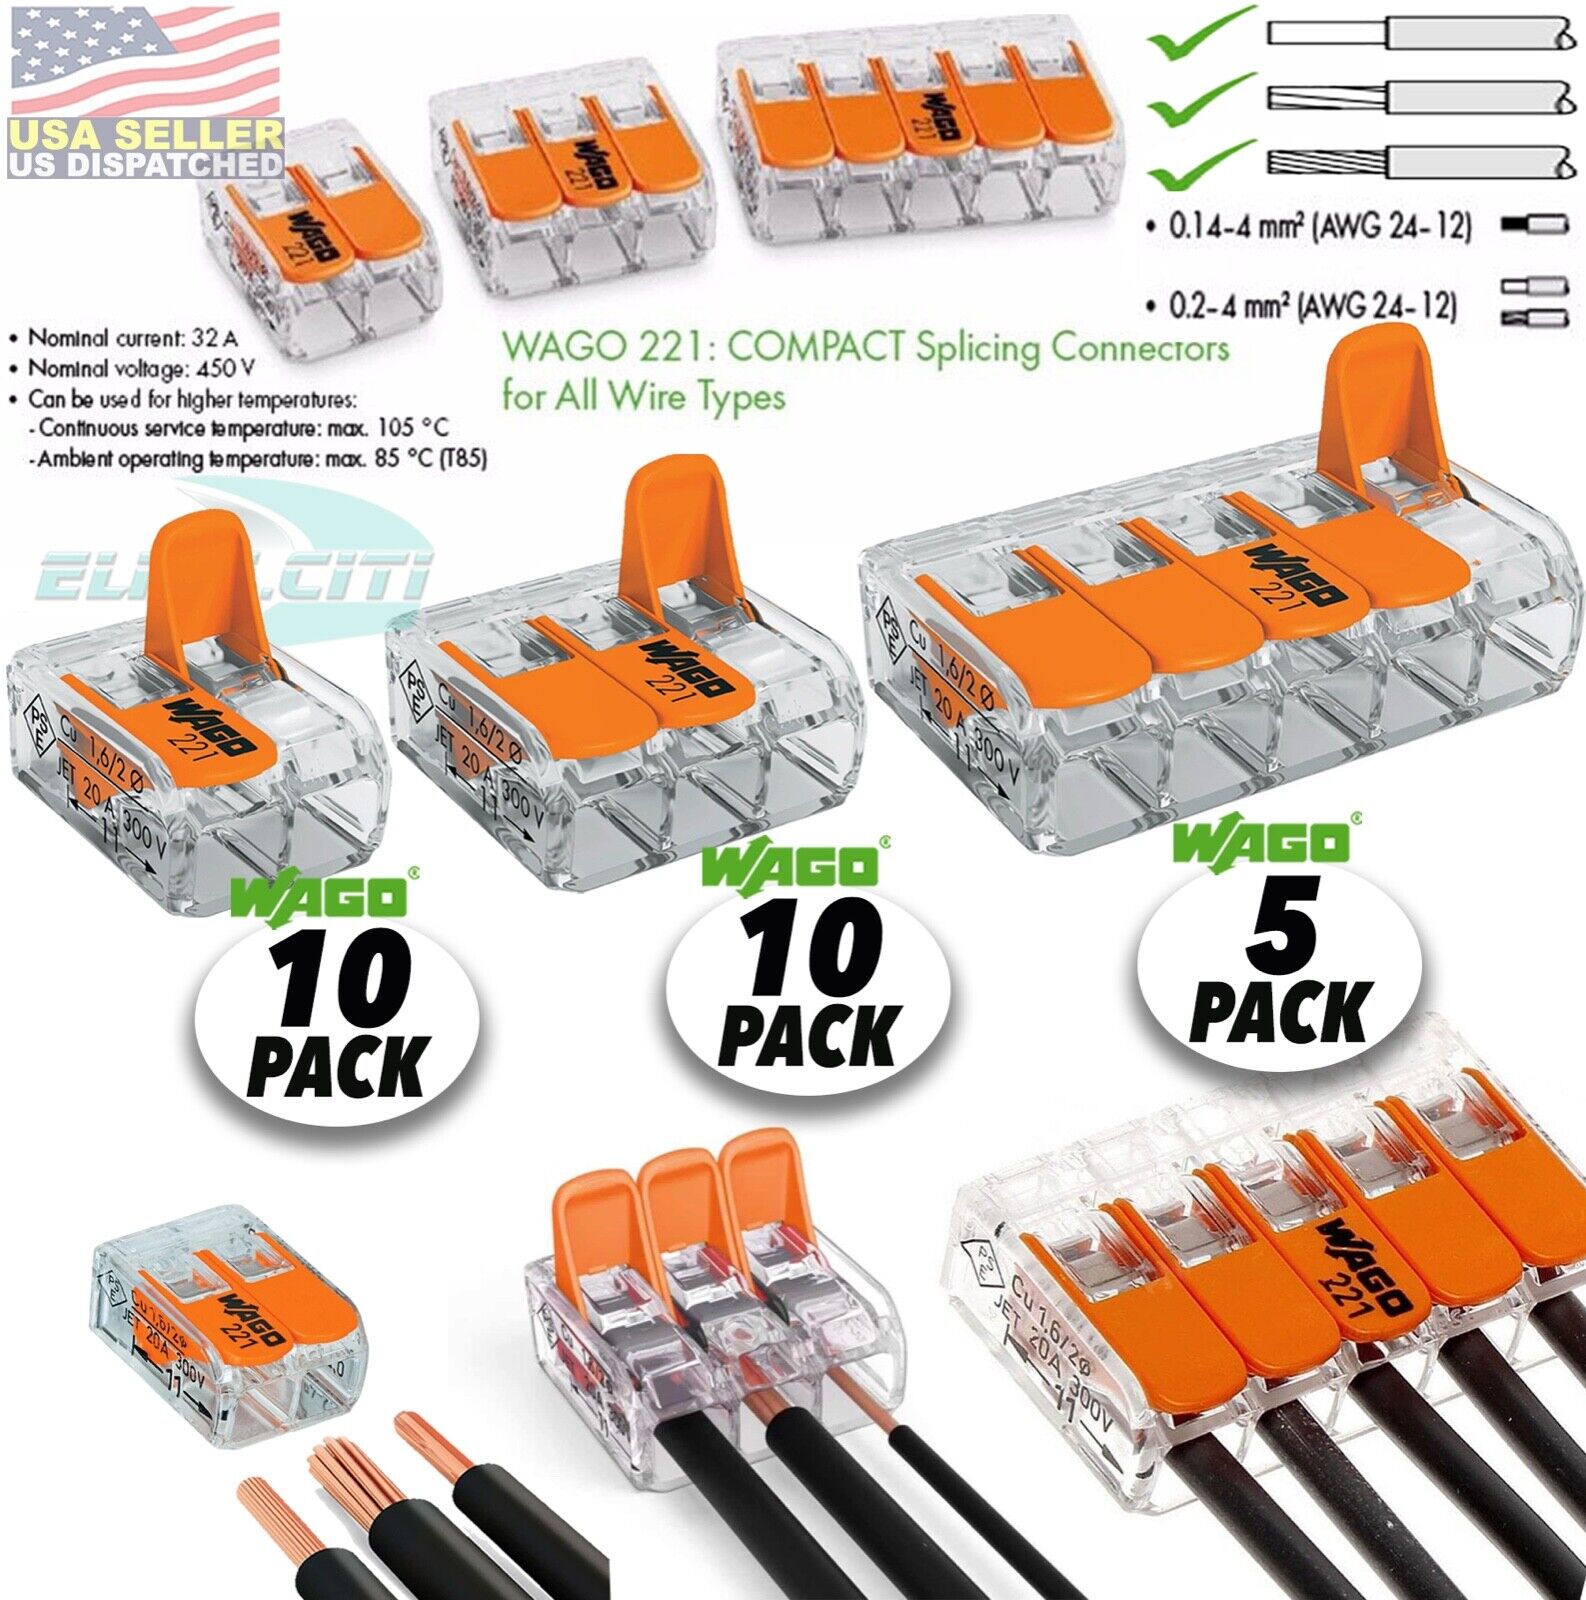 Wago Transparent 2,3,5 Splicing Wire Connector, Lever-Nuts Terminal Block (25pc)